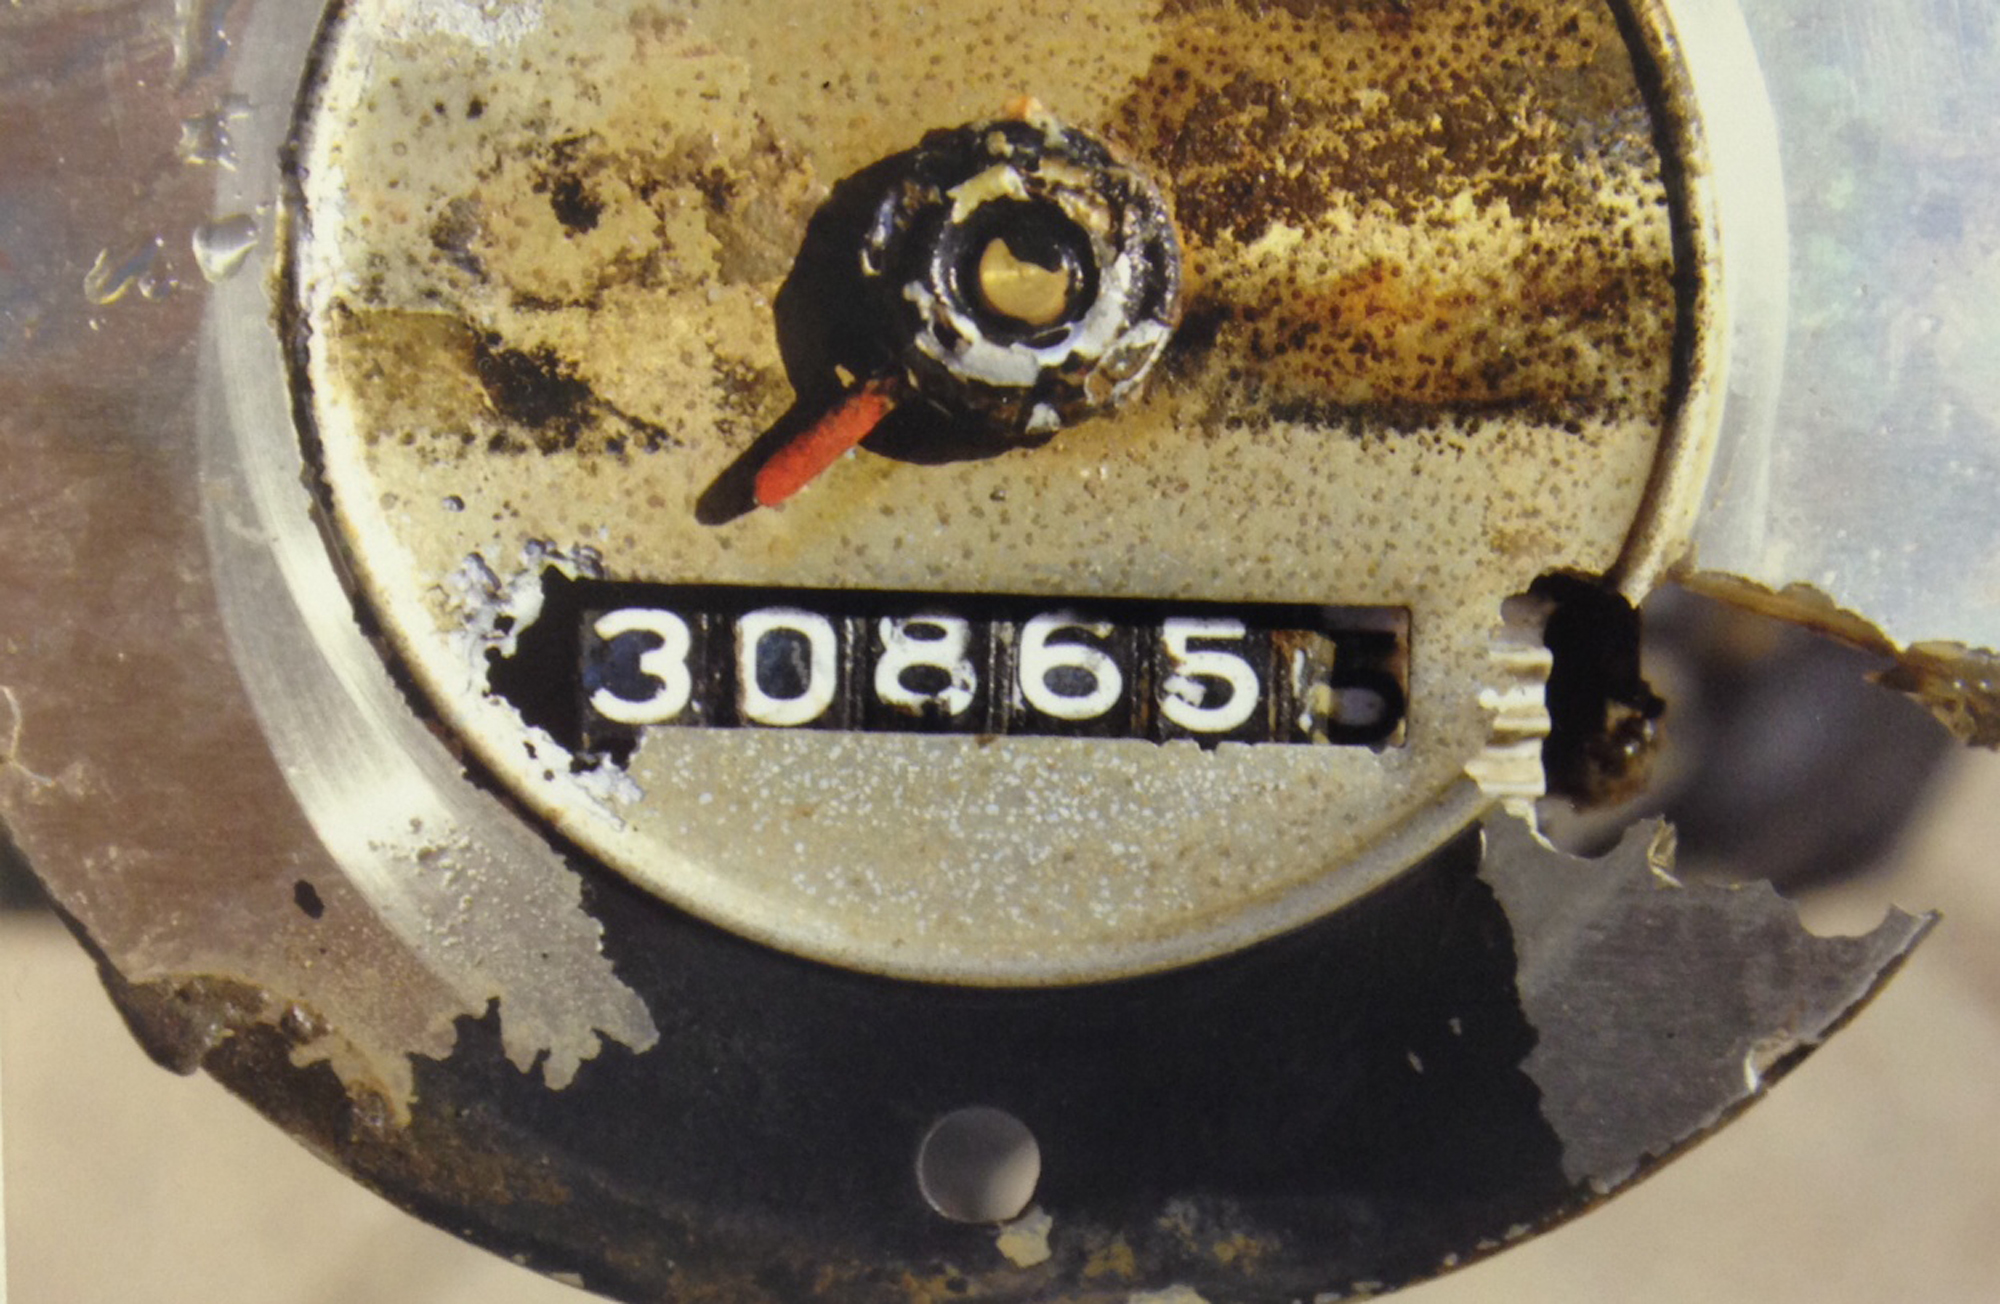 PHOTO: The odometer mileage reading of the 1960 Studebaker unearthed in September, 2013.